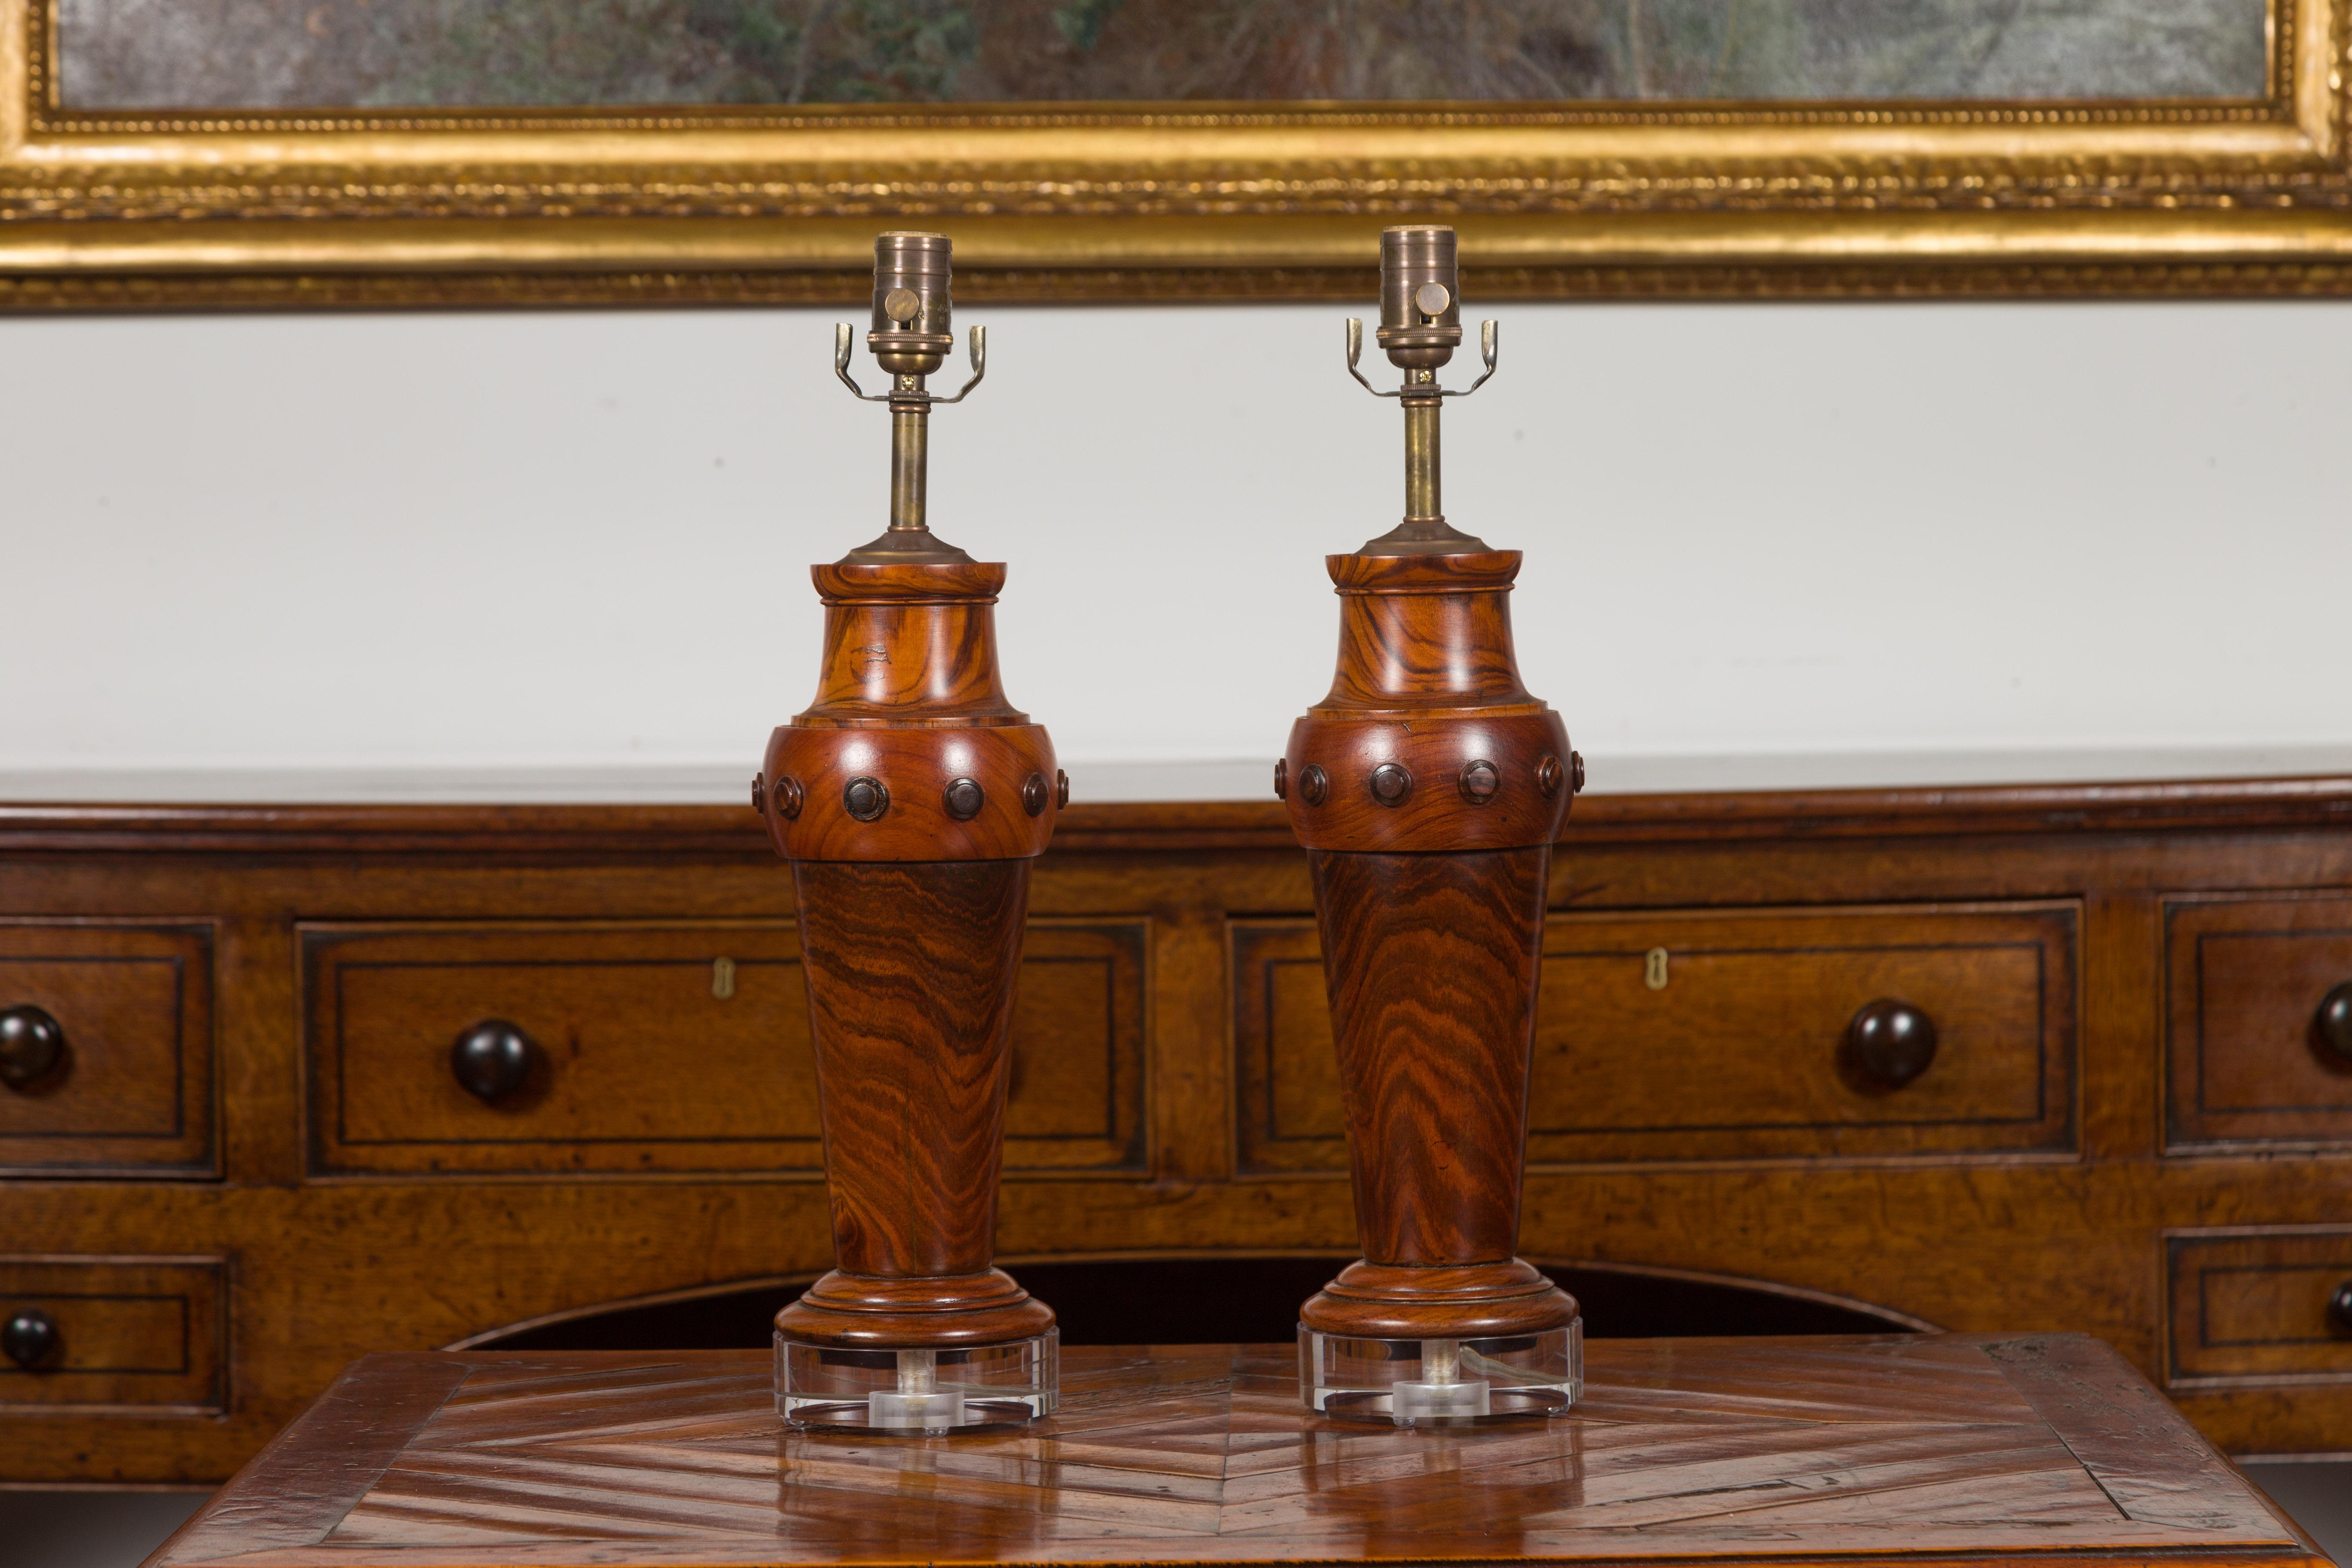 A pair of French turned wood table lamps from the mid-20th century with Lucite bases. Created in France during the midcentury period, each of this pair of table lamps attracts our attention with its beautiful wood grain and medallion accentuation.